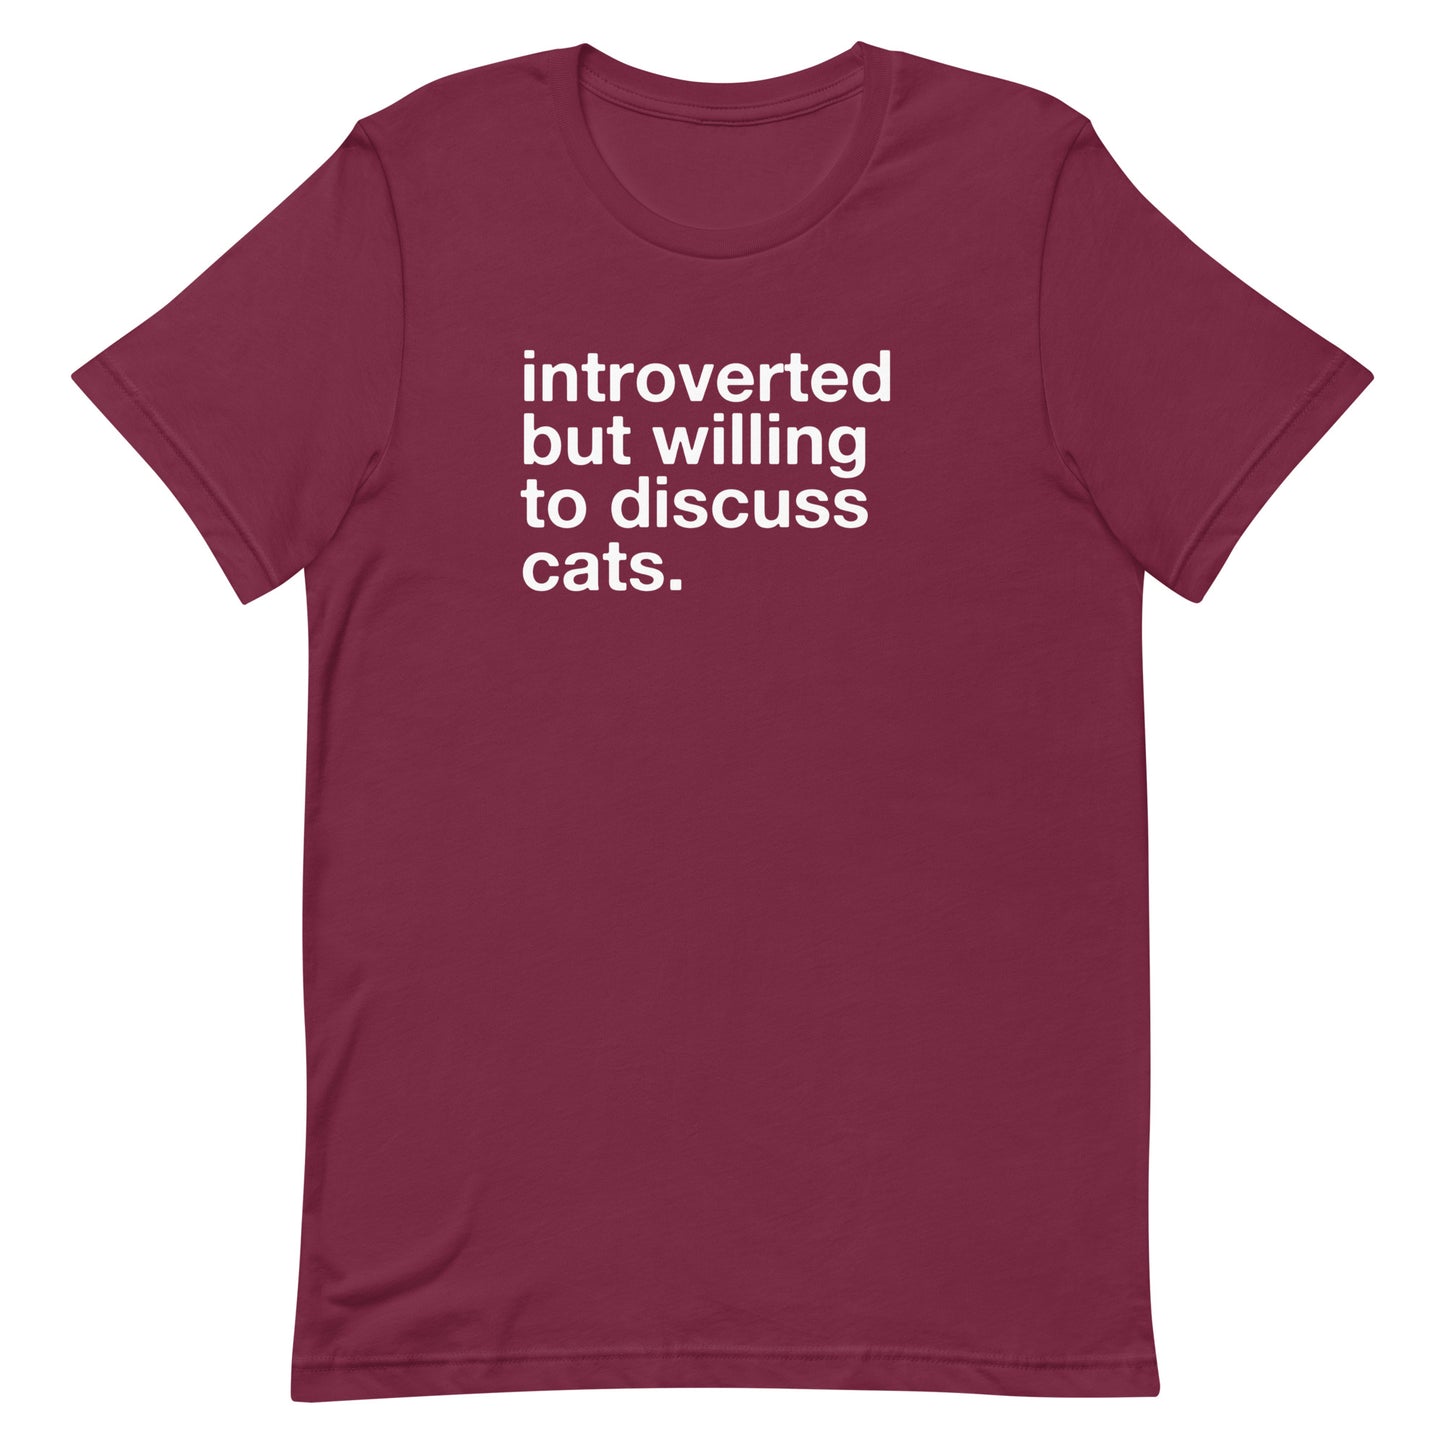 introverted but willing to discuss cats. - Unisex Classic Tee